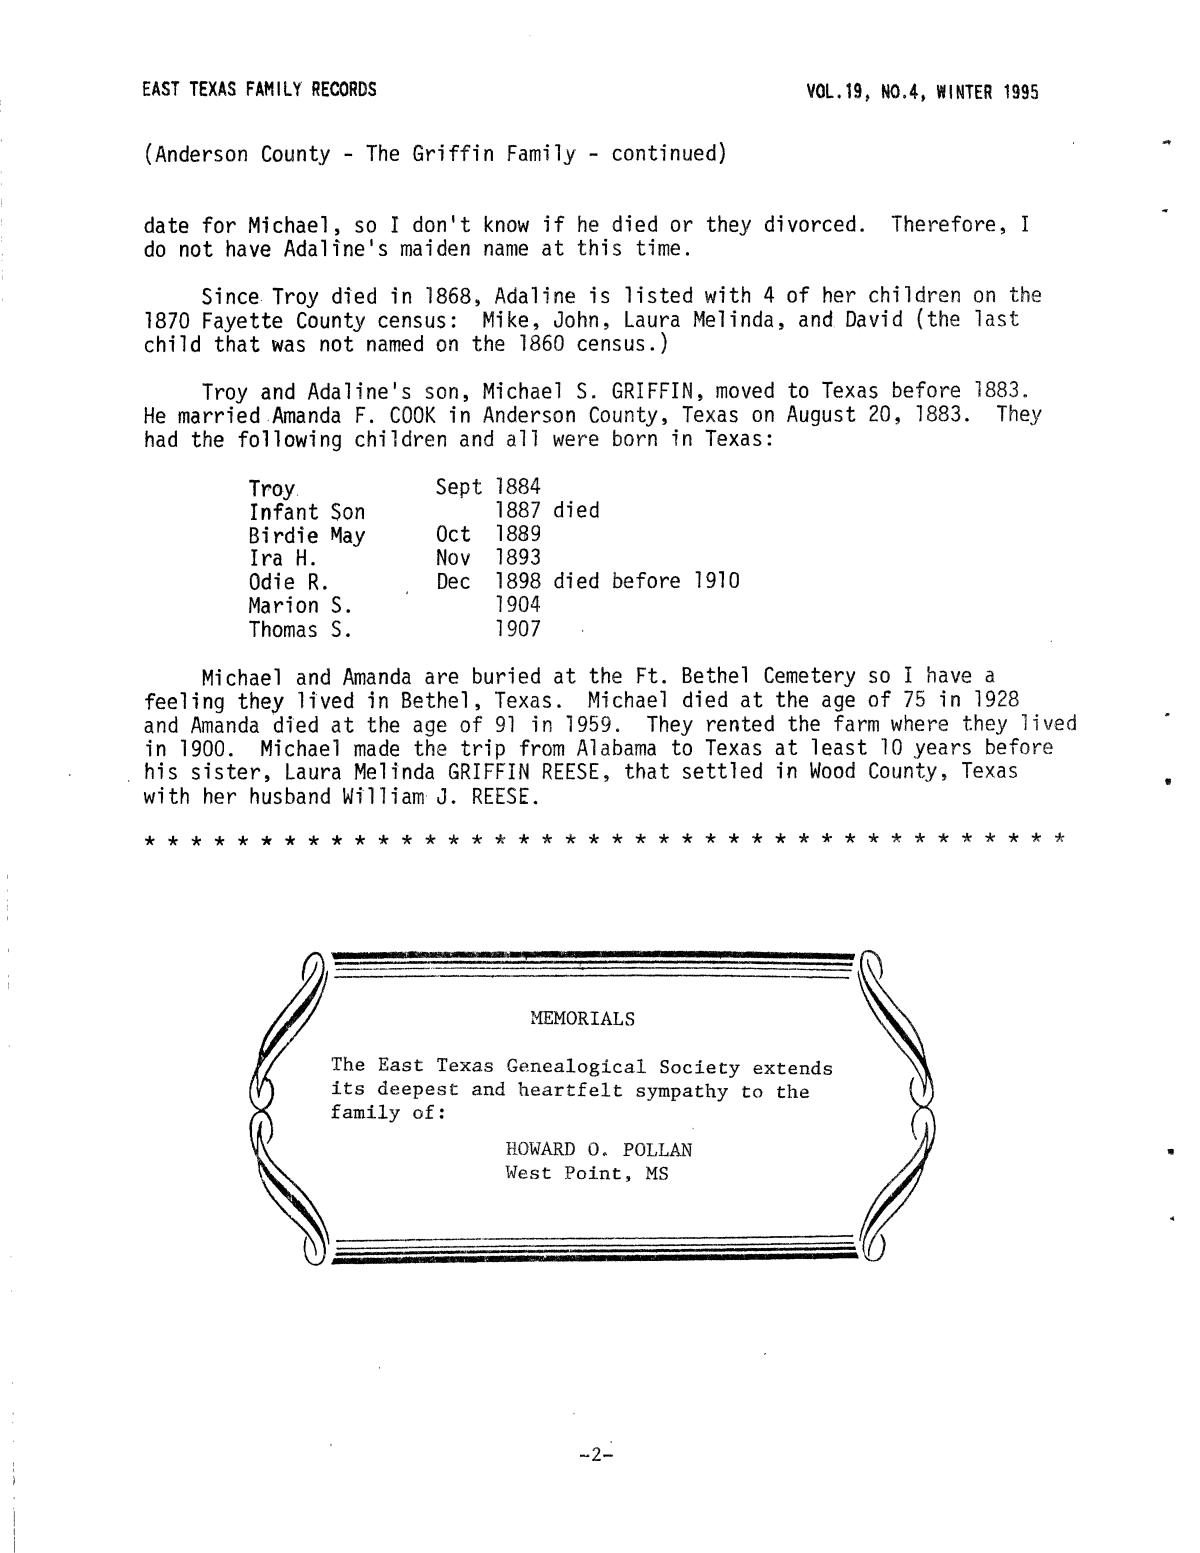 East Texas Family Records, Volume 19, Number 4, Winter 1995
                                                
                                                    2
                                                